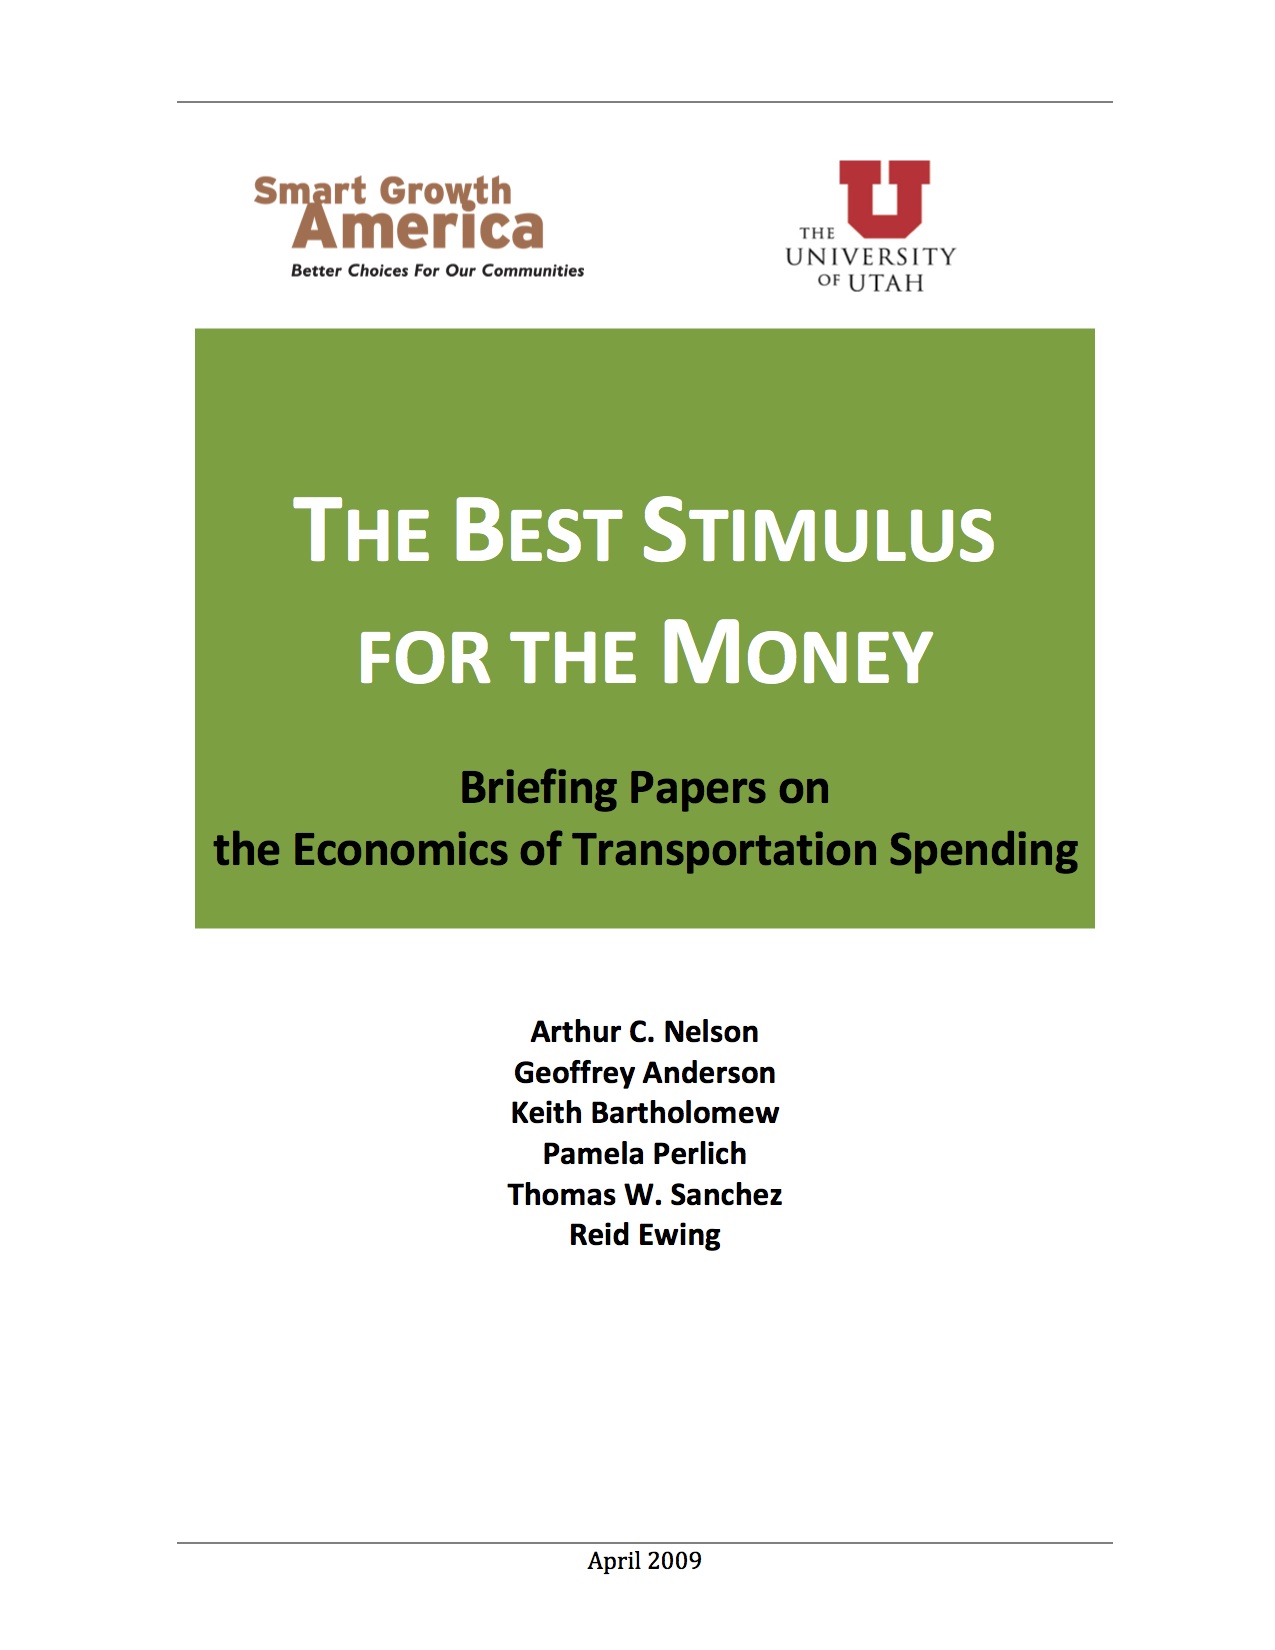 The Best Stimulus for the Money